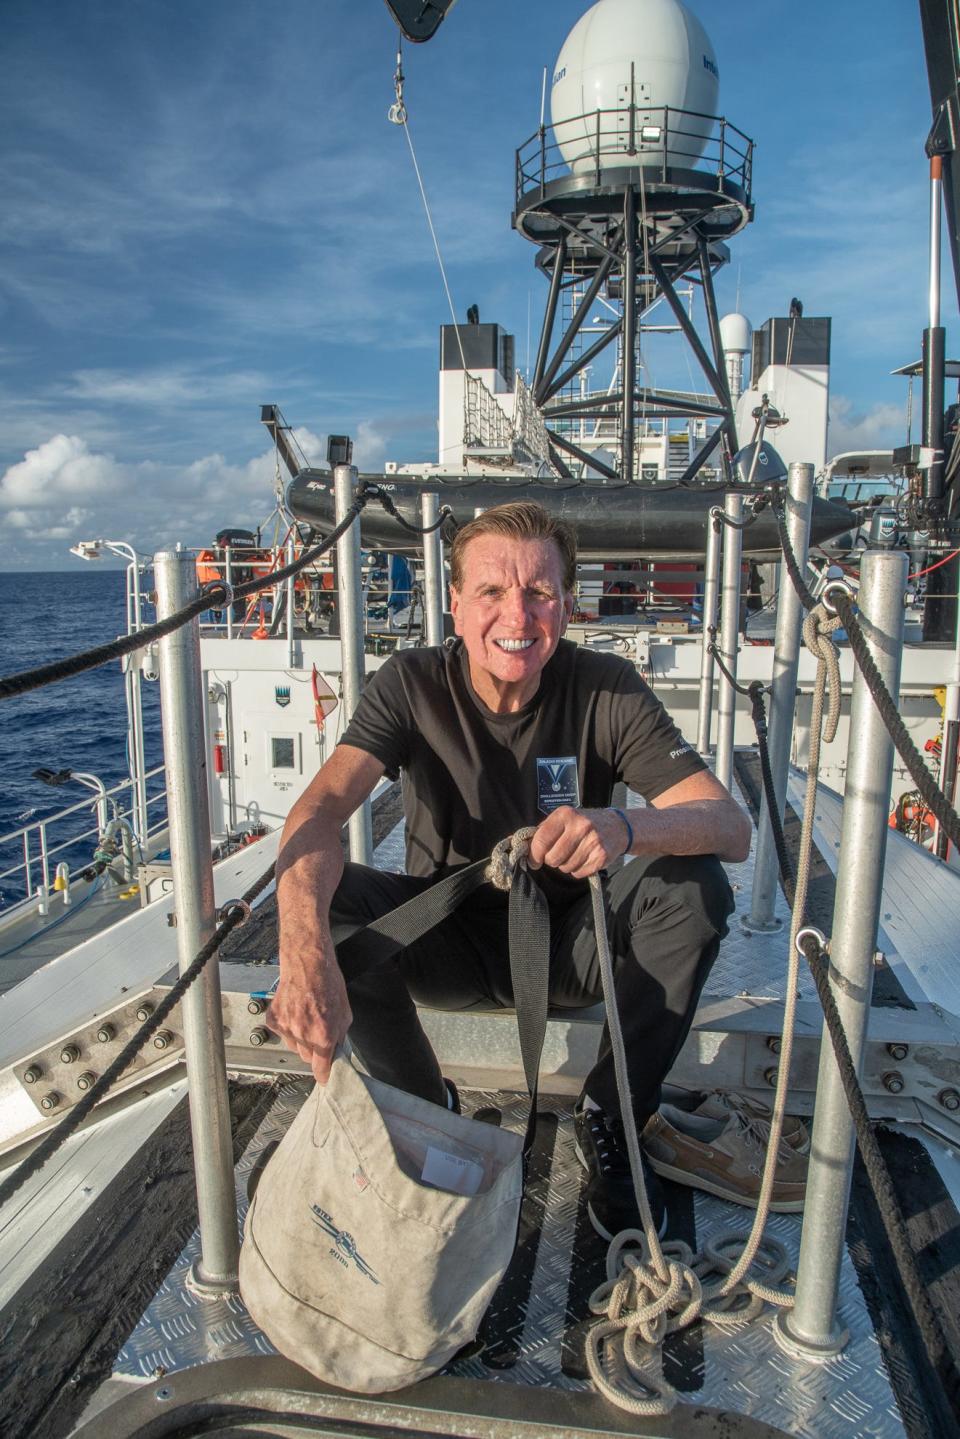 Real estate and technology entrepreneur Larry Connor successfully completed three dives in just five days to the deepest ocean depths in the Mariana Trench this month.